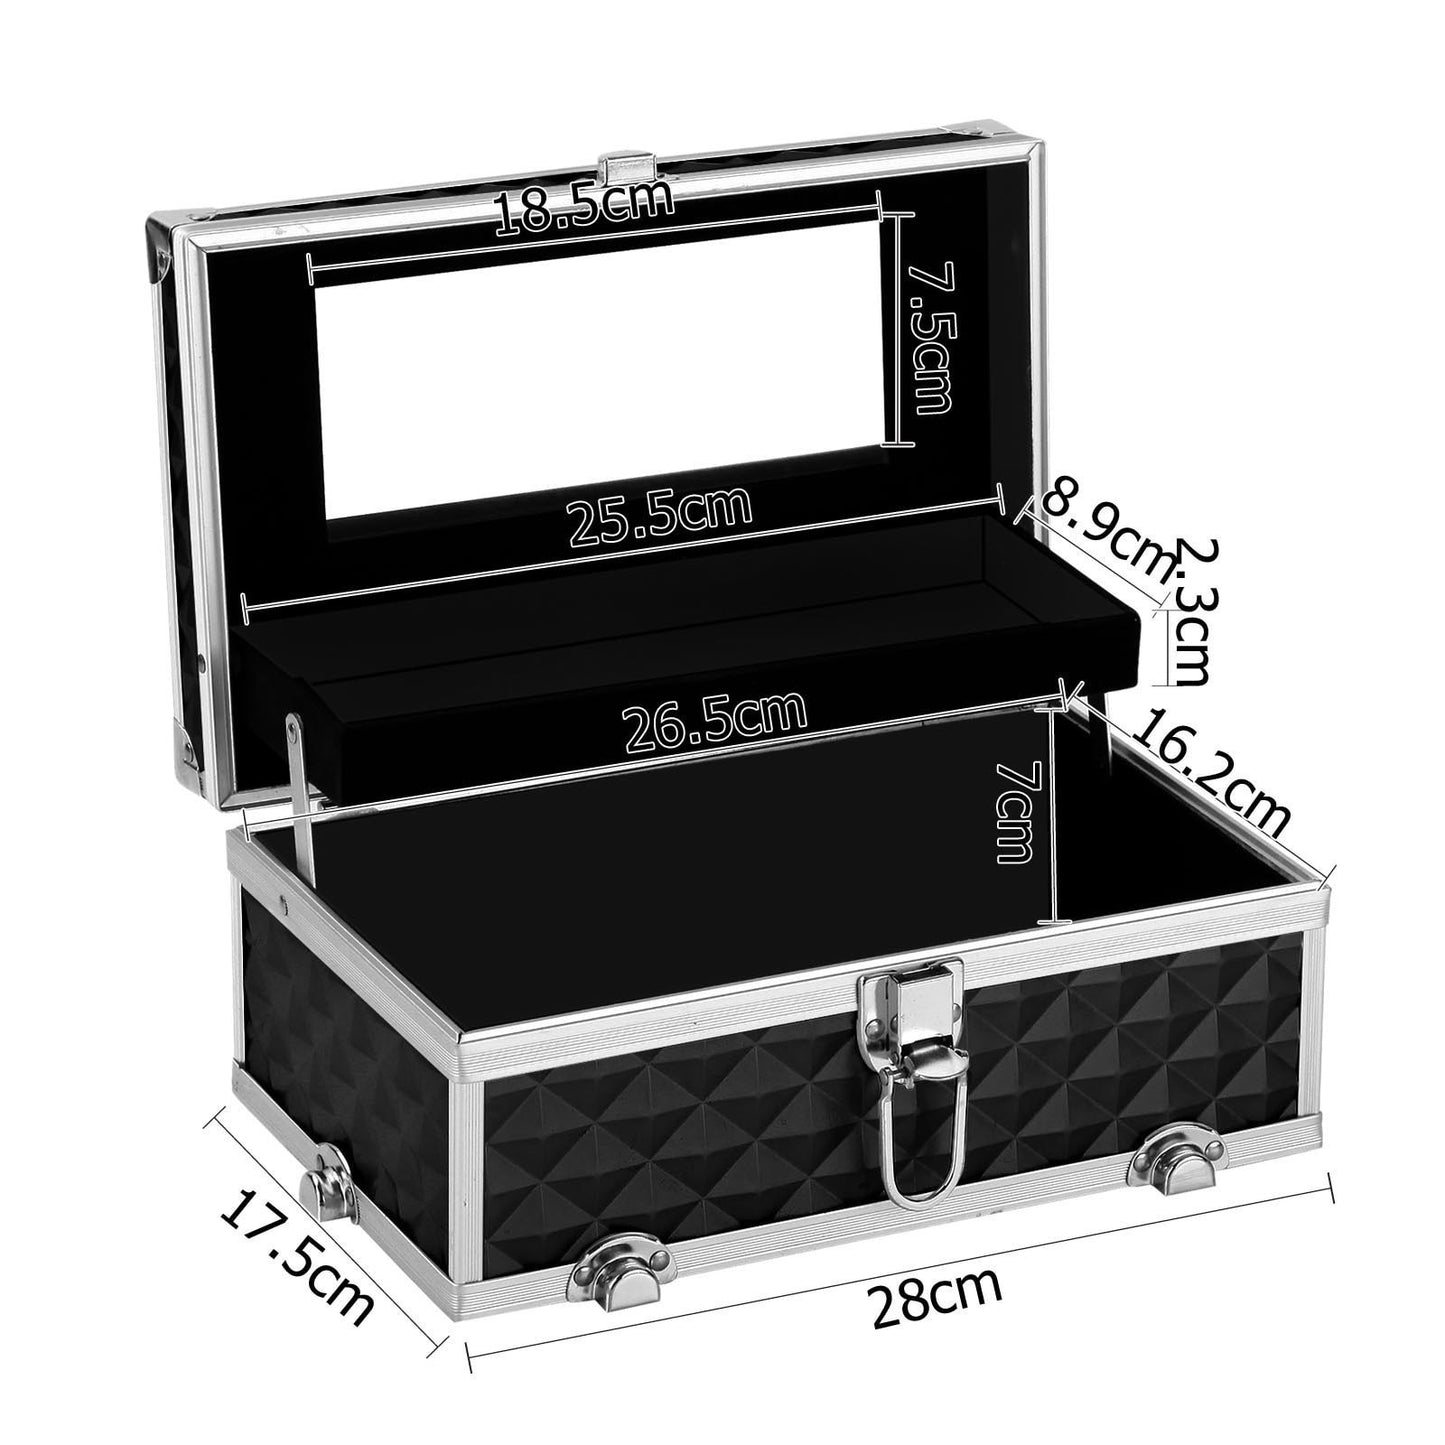 Portable Cosmetic Beauty Makeup Carry Case with Mirror - Diamond Black